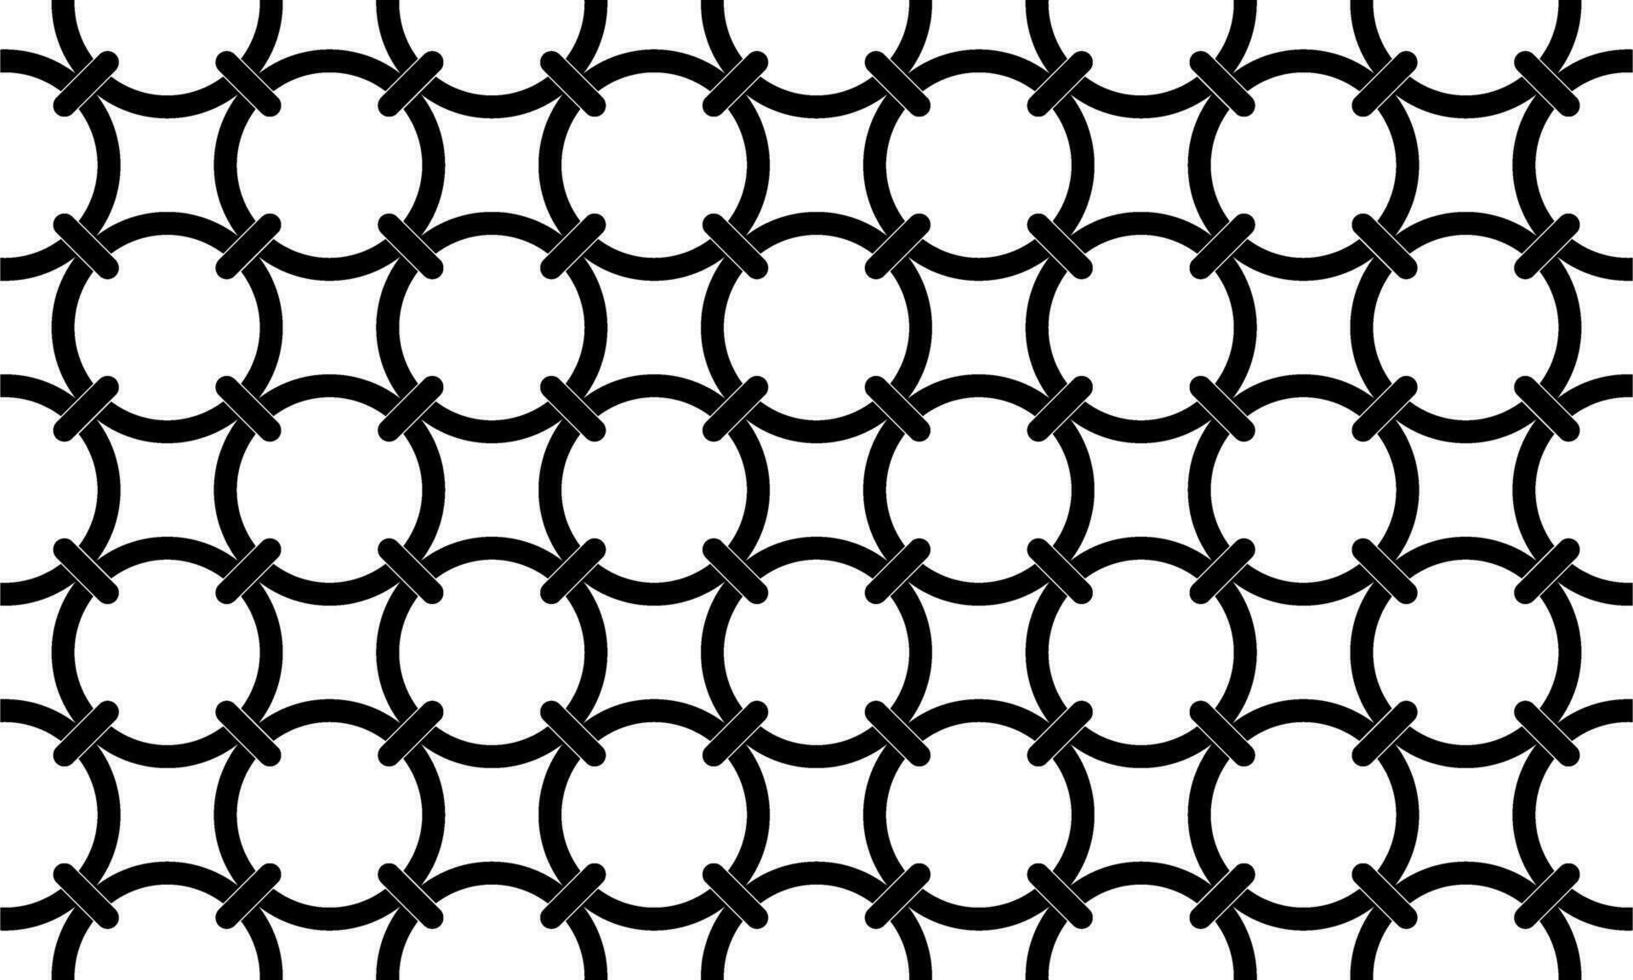 Circle Shape Motifs Pattern, can use for Ornate, Background or for Decoration. Modern Contemporary Pattern Style. Vector Illustration